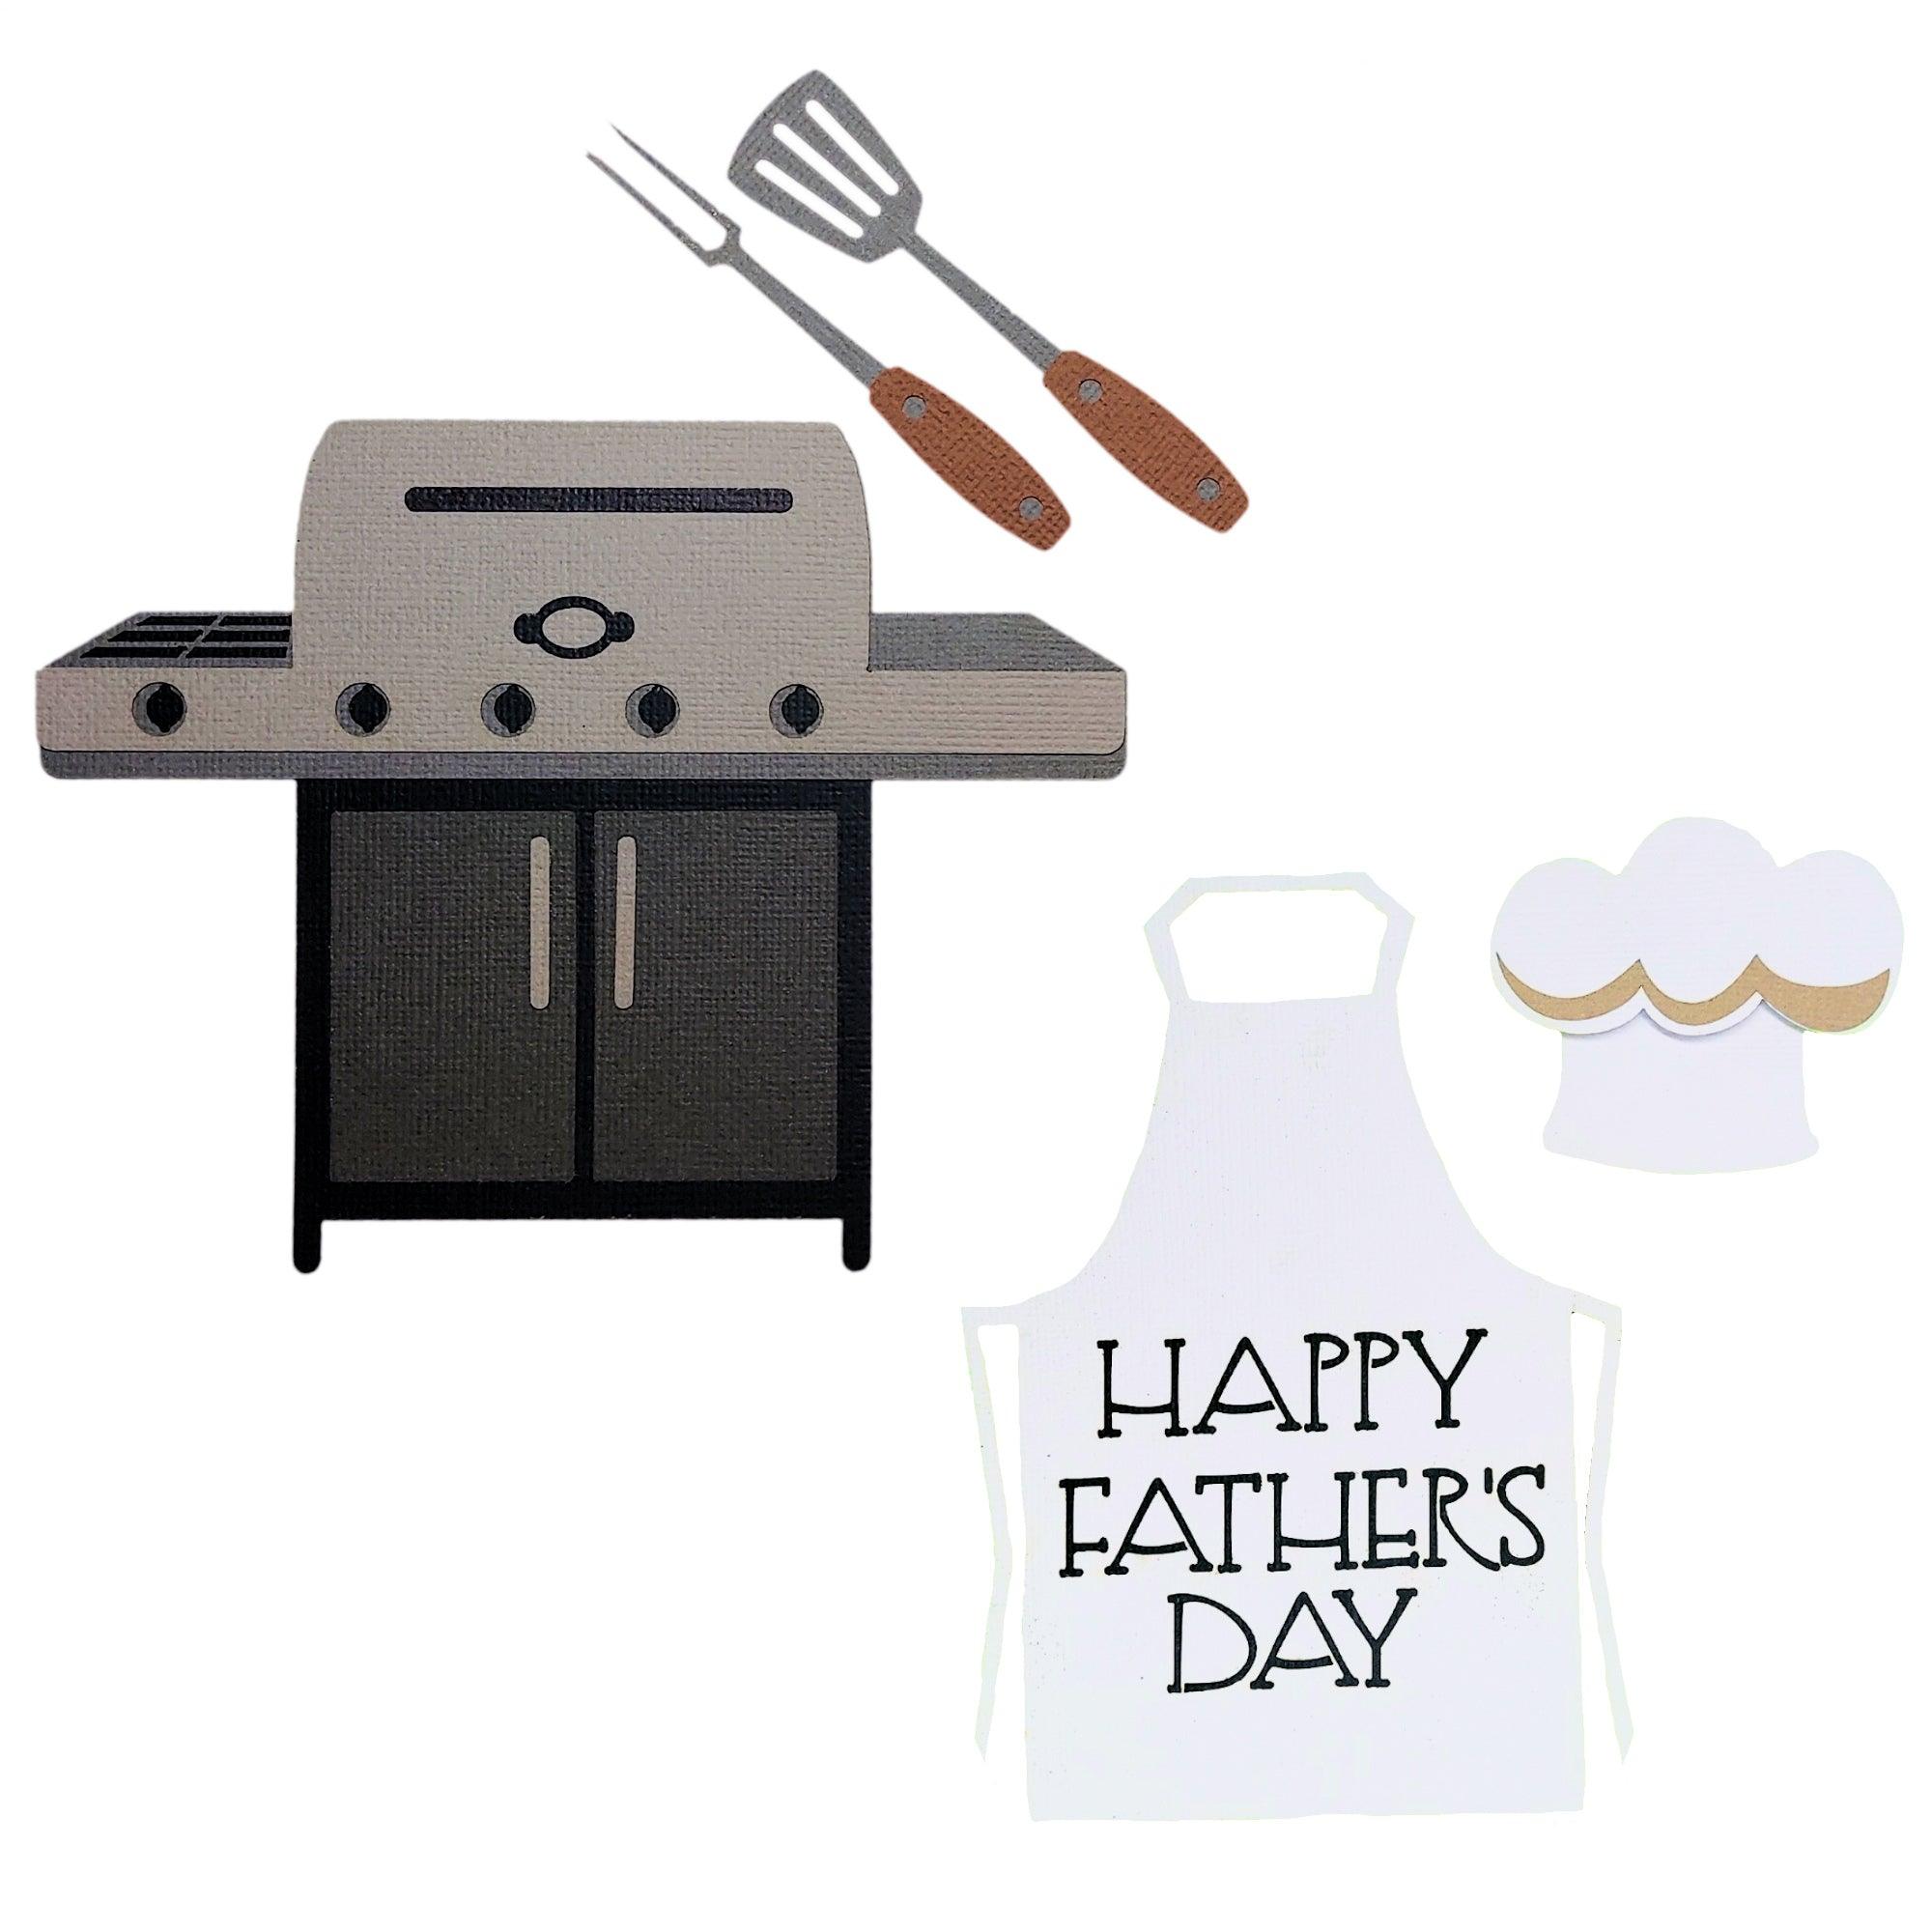 Father's Day Grill, Apron, & Tools Fully-Assembled Laser Cut Scrapbook Embellishment by SSC Laser Designs